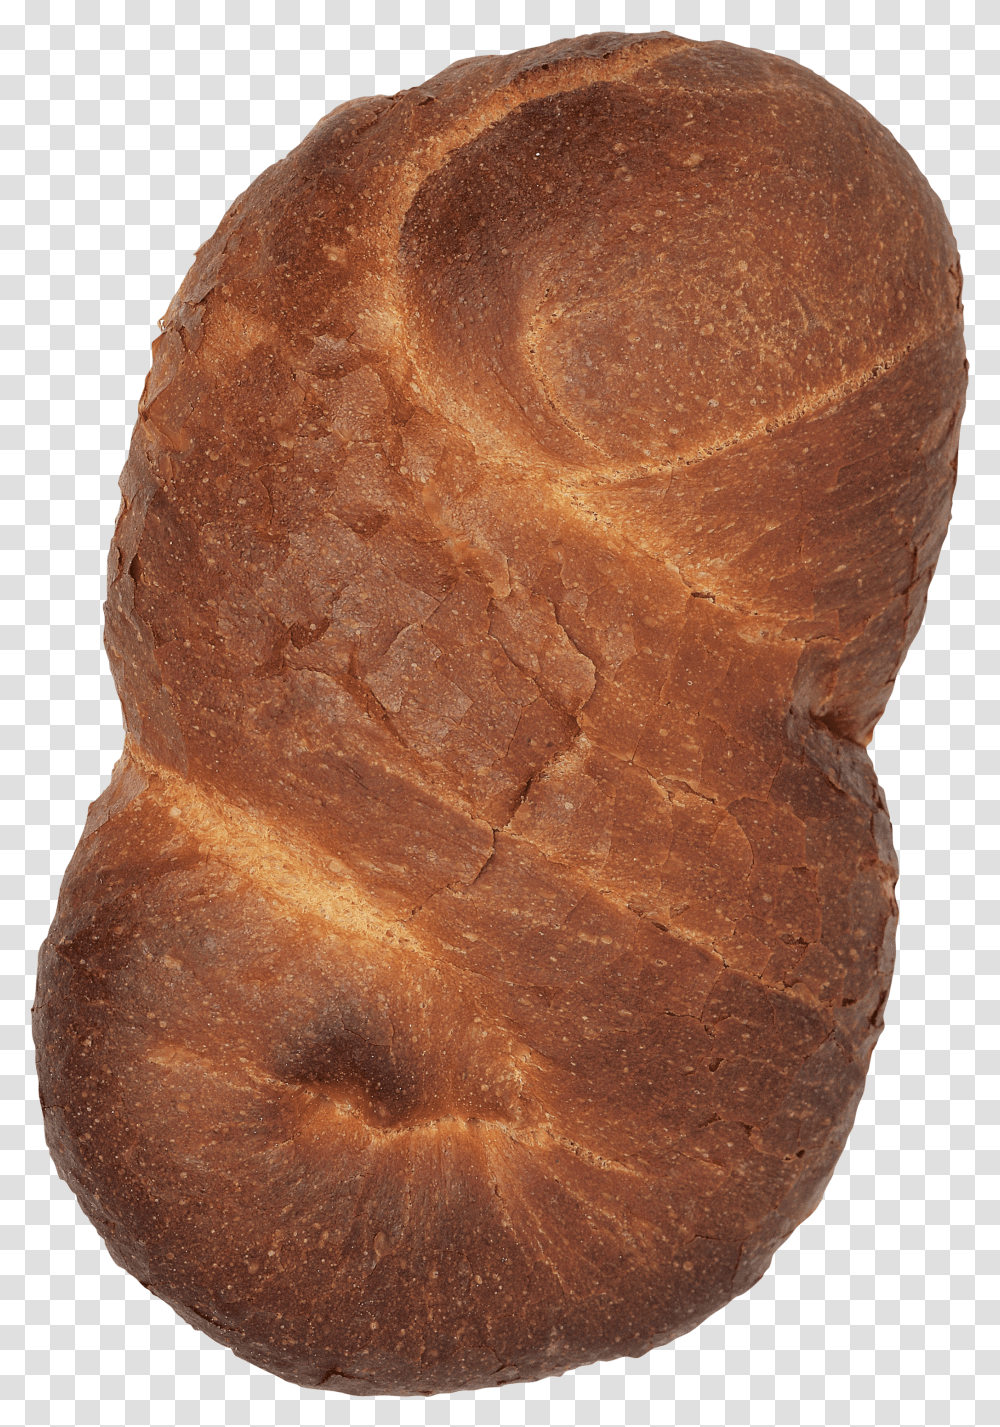 Bread Image Rye Bread Transparent Png